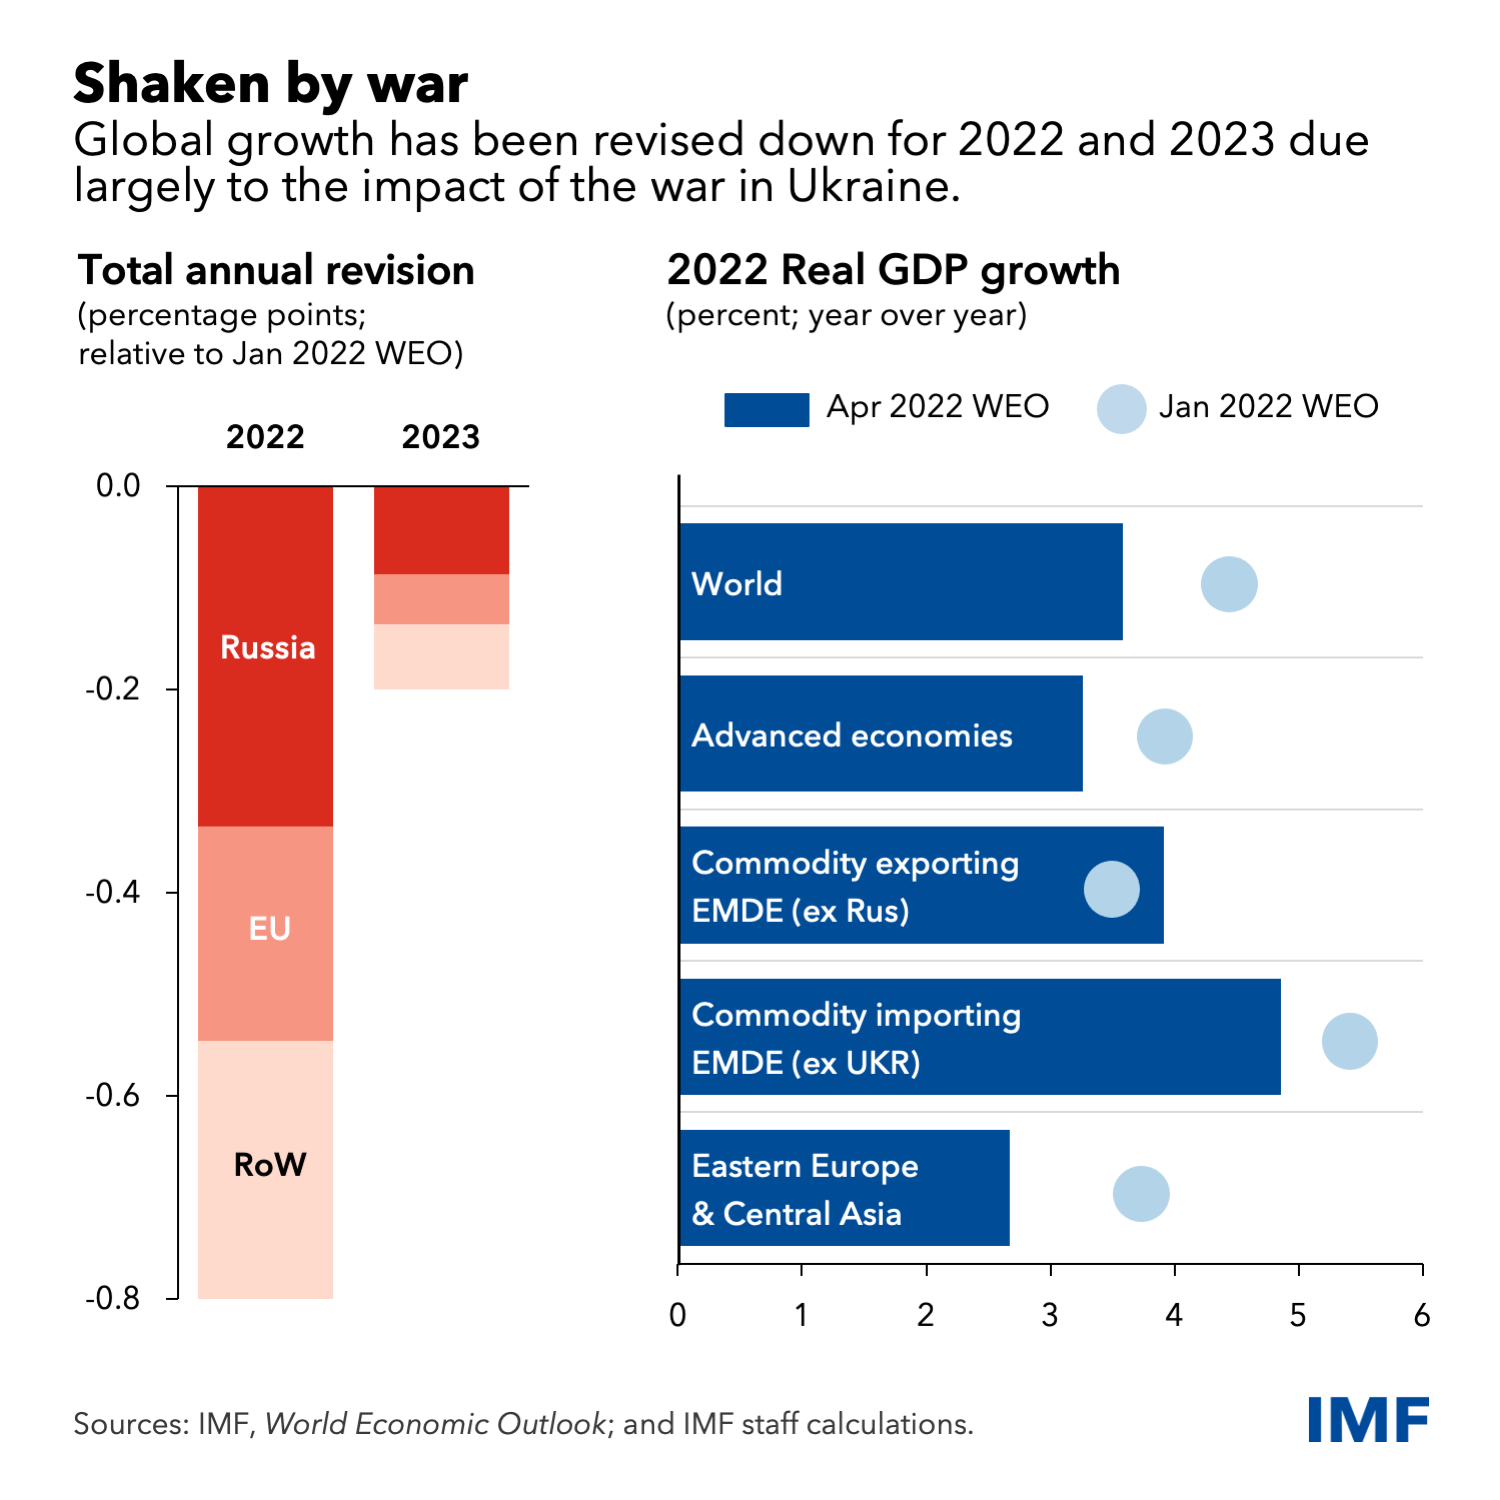 Revisions to IMF global growth projections caused by Russia’s war on Ukraine, 19 April 2022. Compared to IMF’s January 2022 forecast, the projection for global growth was revised downward to 3.6 percent in both 2022 and 2023. This reflects the direct impact of the war on Ukraine and sanctions on Russia, with both countries projected to experience steep contractions. The growth outlook for the European Union has been revised downward by 1.1 percentage points due to the indirect effects of the war, making it the second largest contributor to the overall downward revision. Graphic: IMF